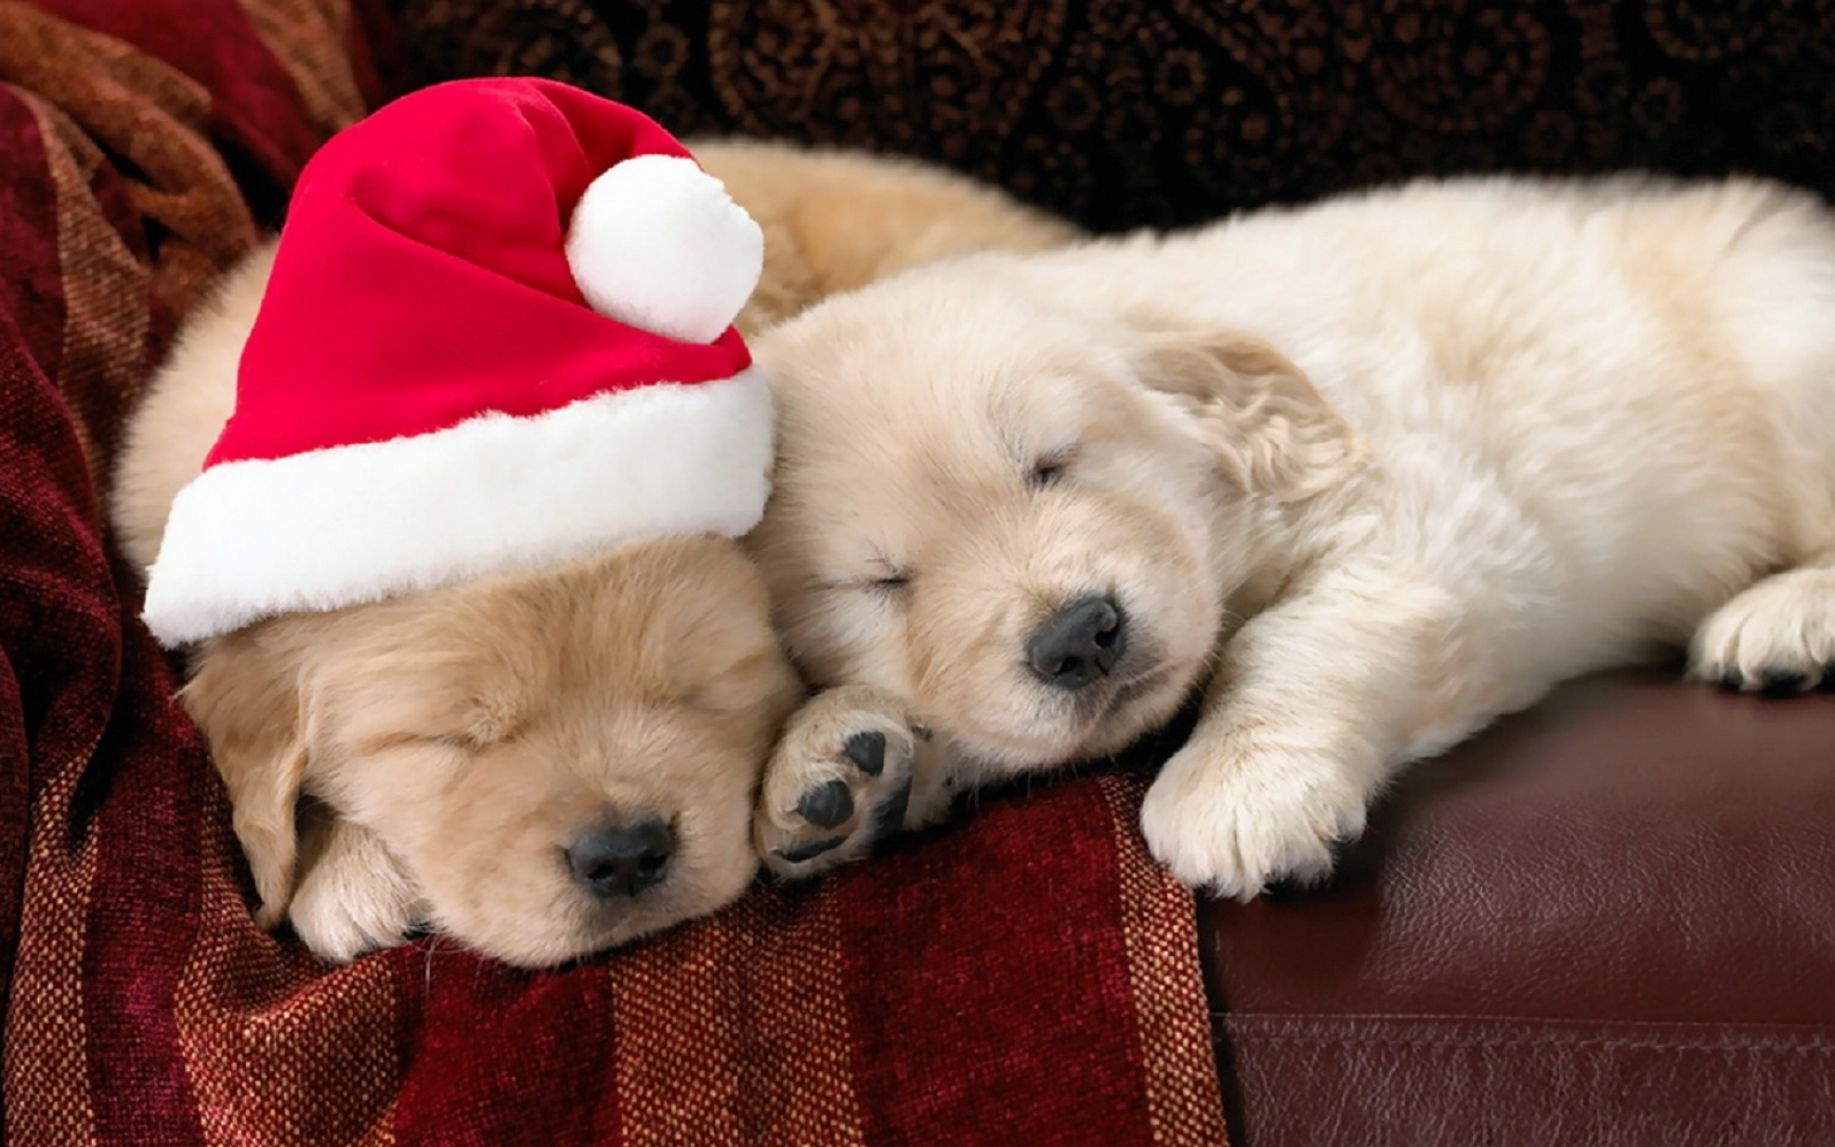 Cute Animal Christmas Wallpaper 10624 Hd Wallpapers in Celebrations